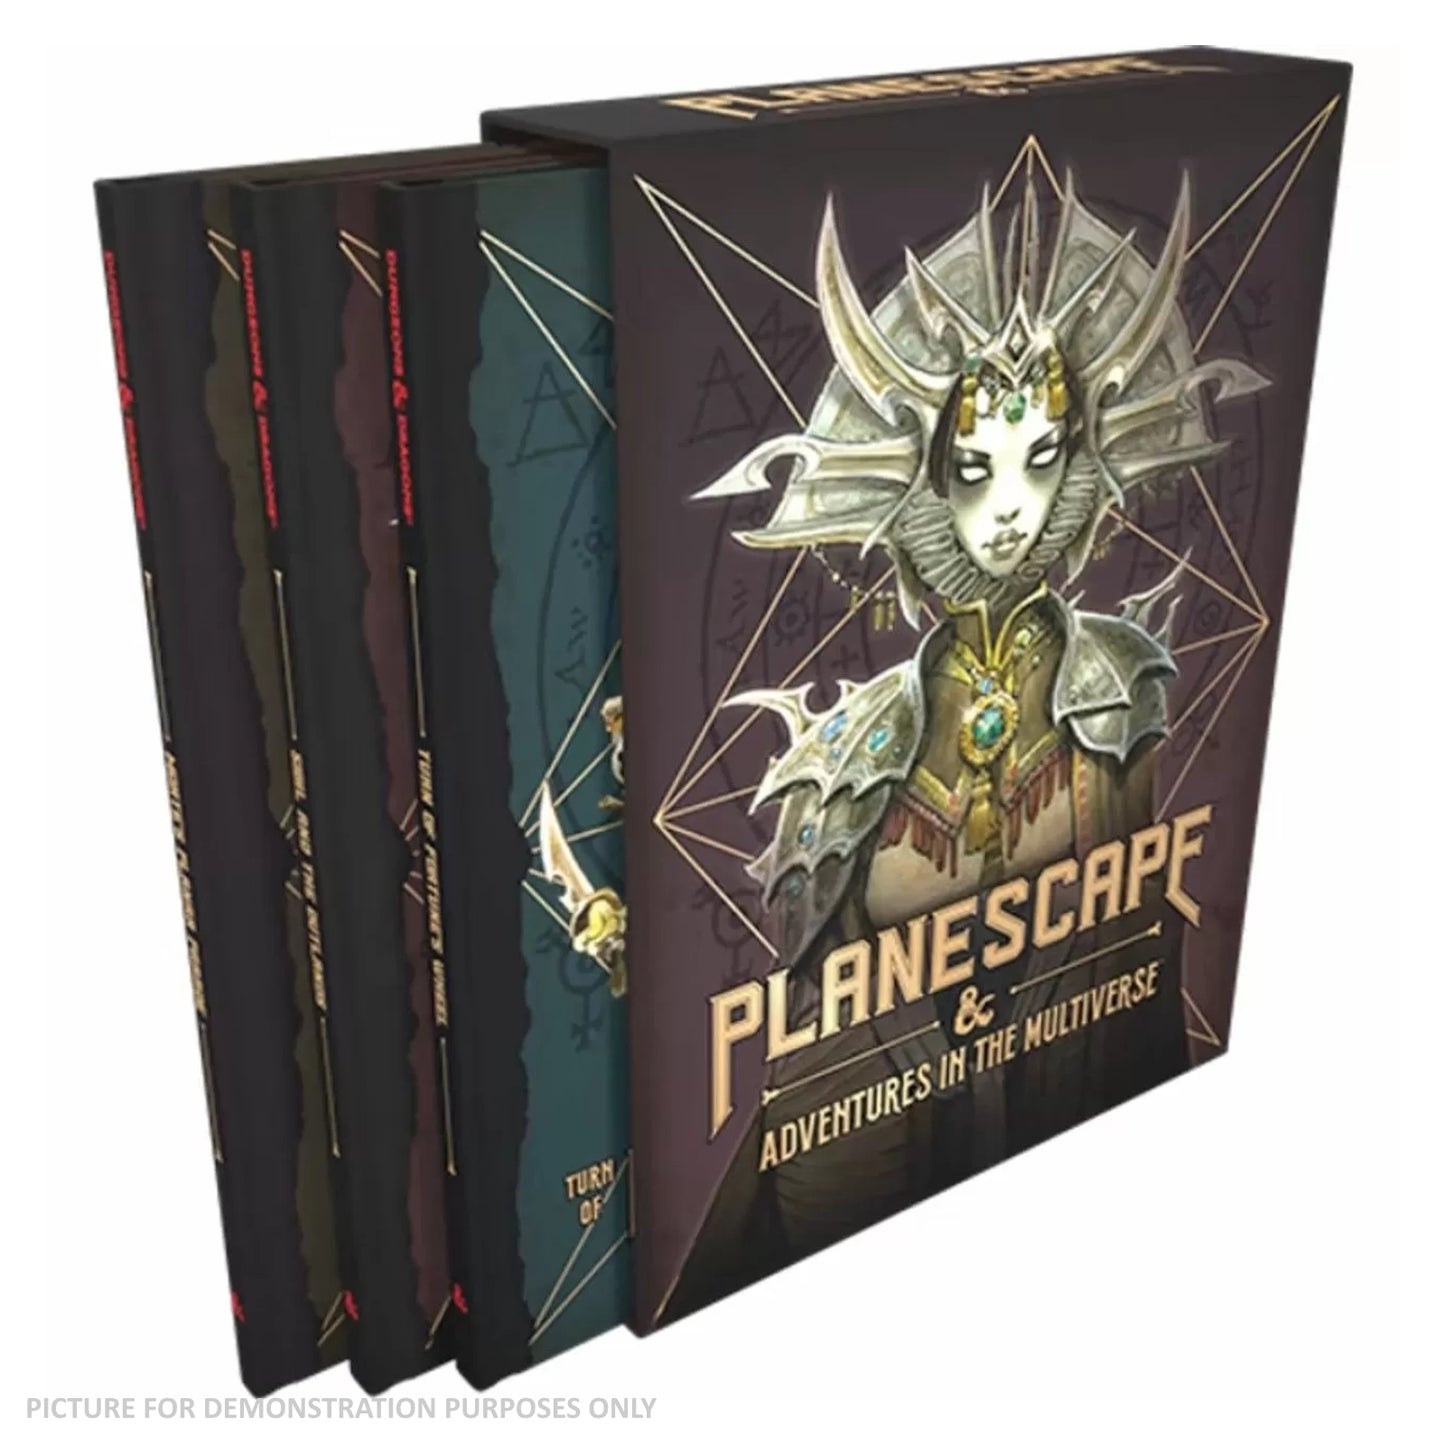 Dungeons & Dragons Planescape - Adventures in the Multiverse Hobby Store Exclusive